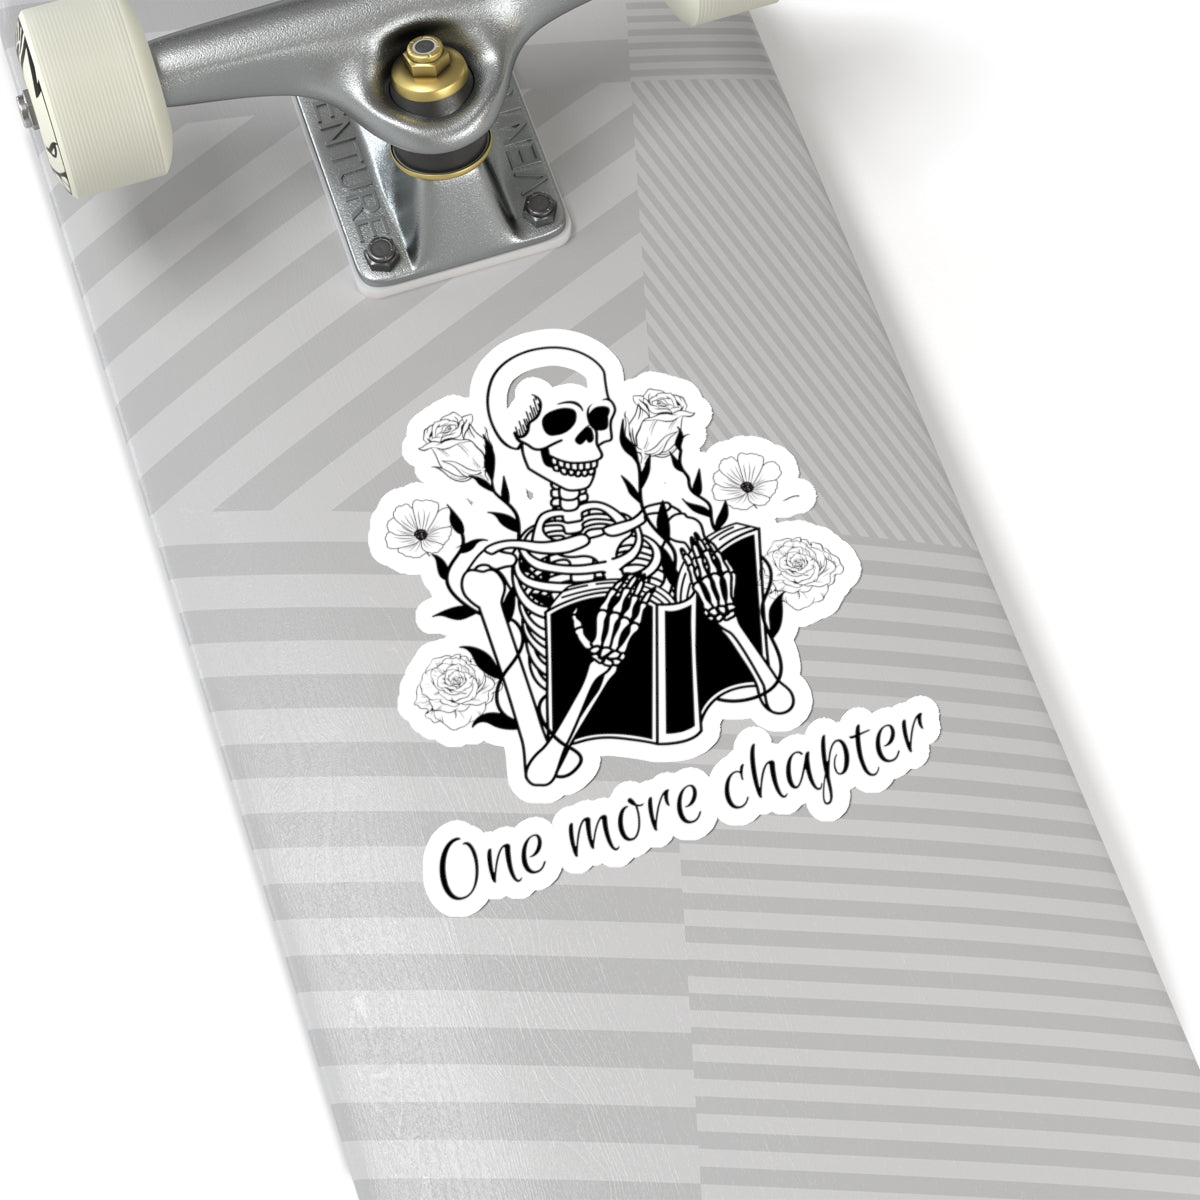 Just One More Chapter Skeleton Floral Kiss-Cut Stickers